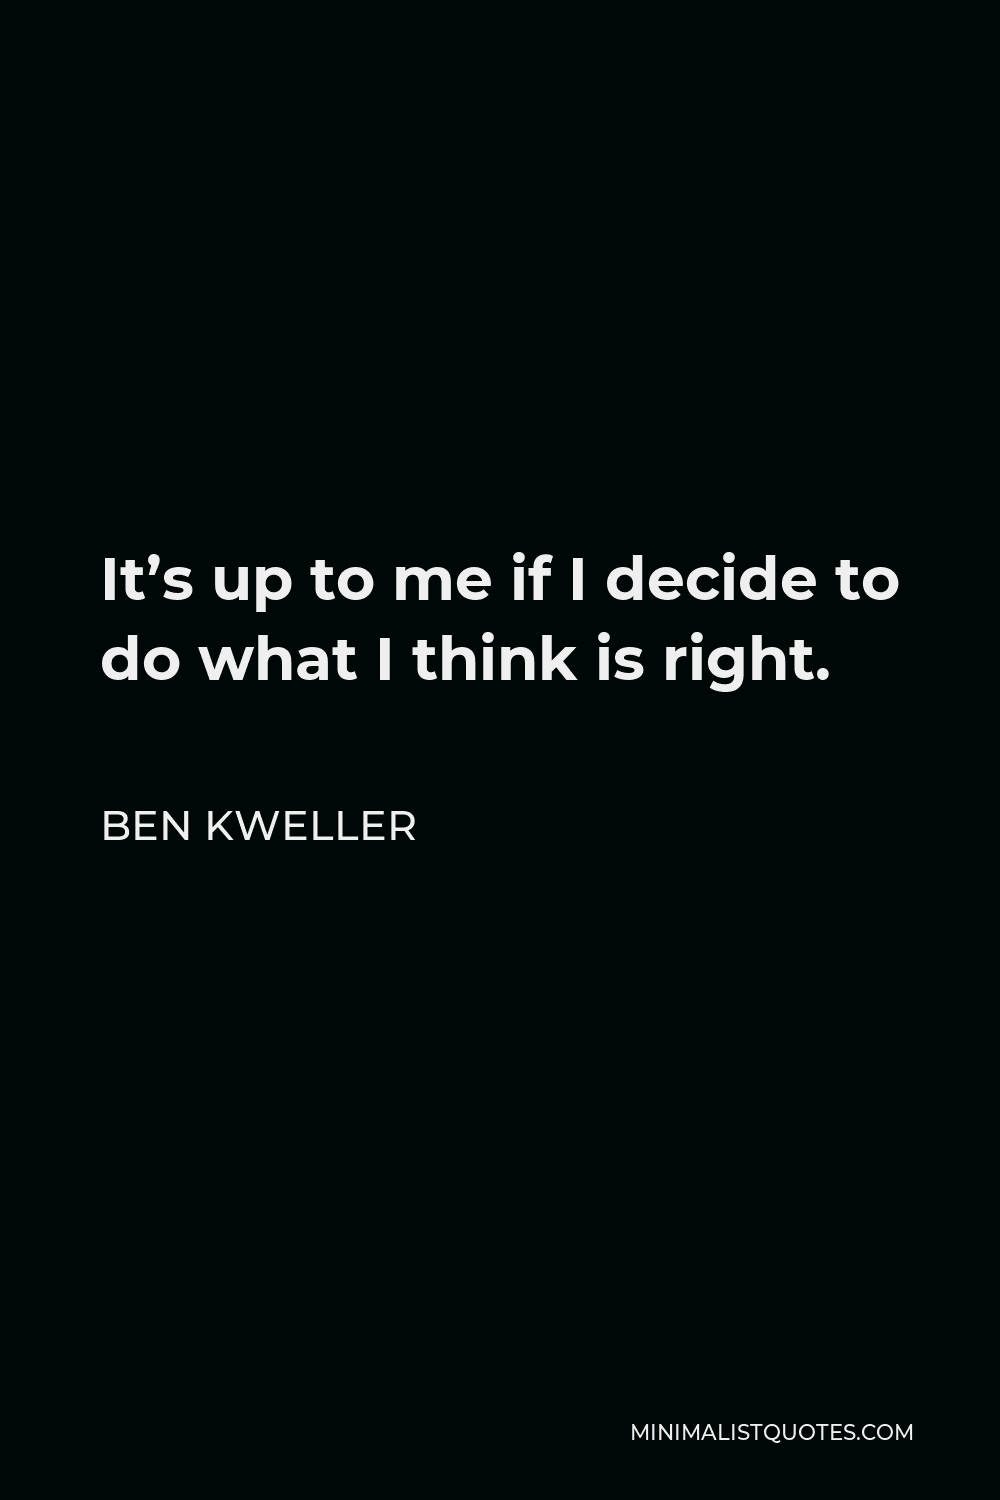 Ben Kweller Quote - It’s up to me if I decide to do what I think is right.